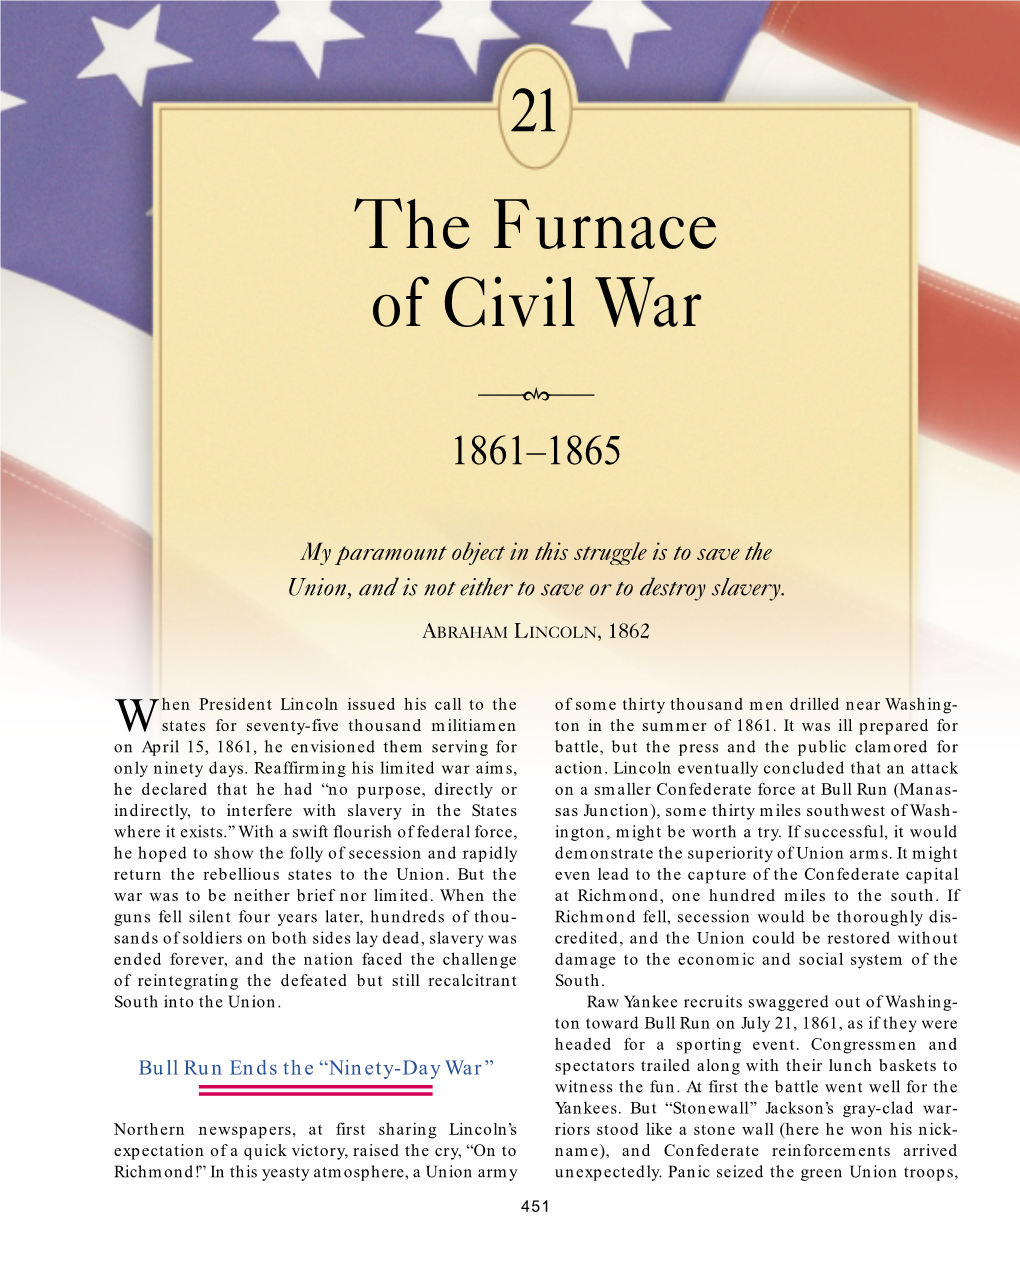 CHAPTER 21 the Furnace of Civil War, 1861–1865